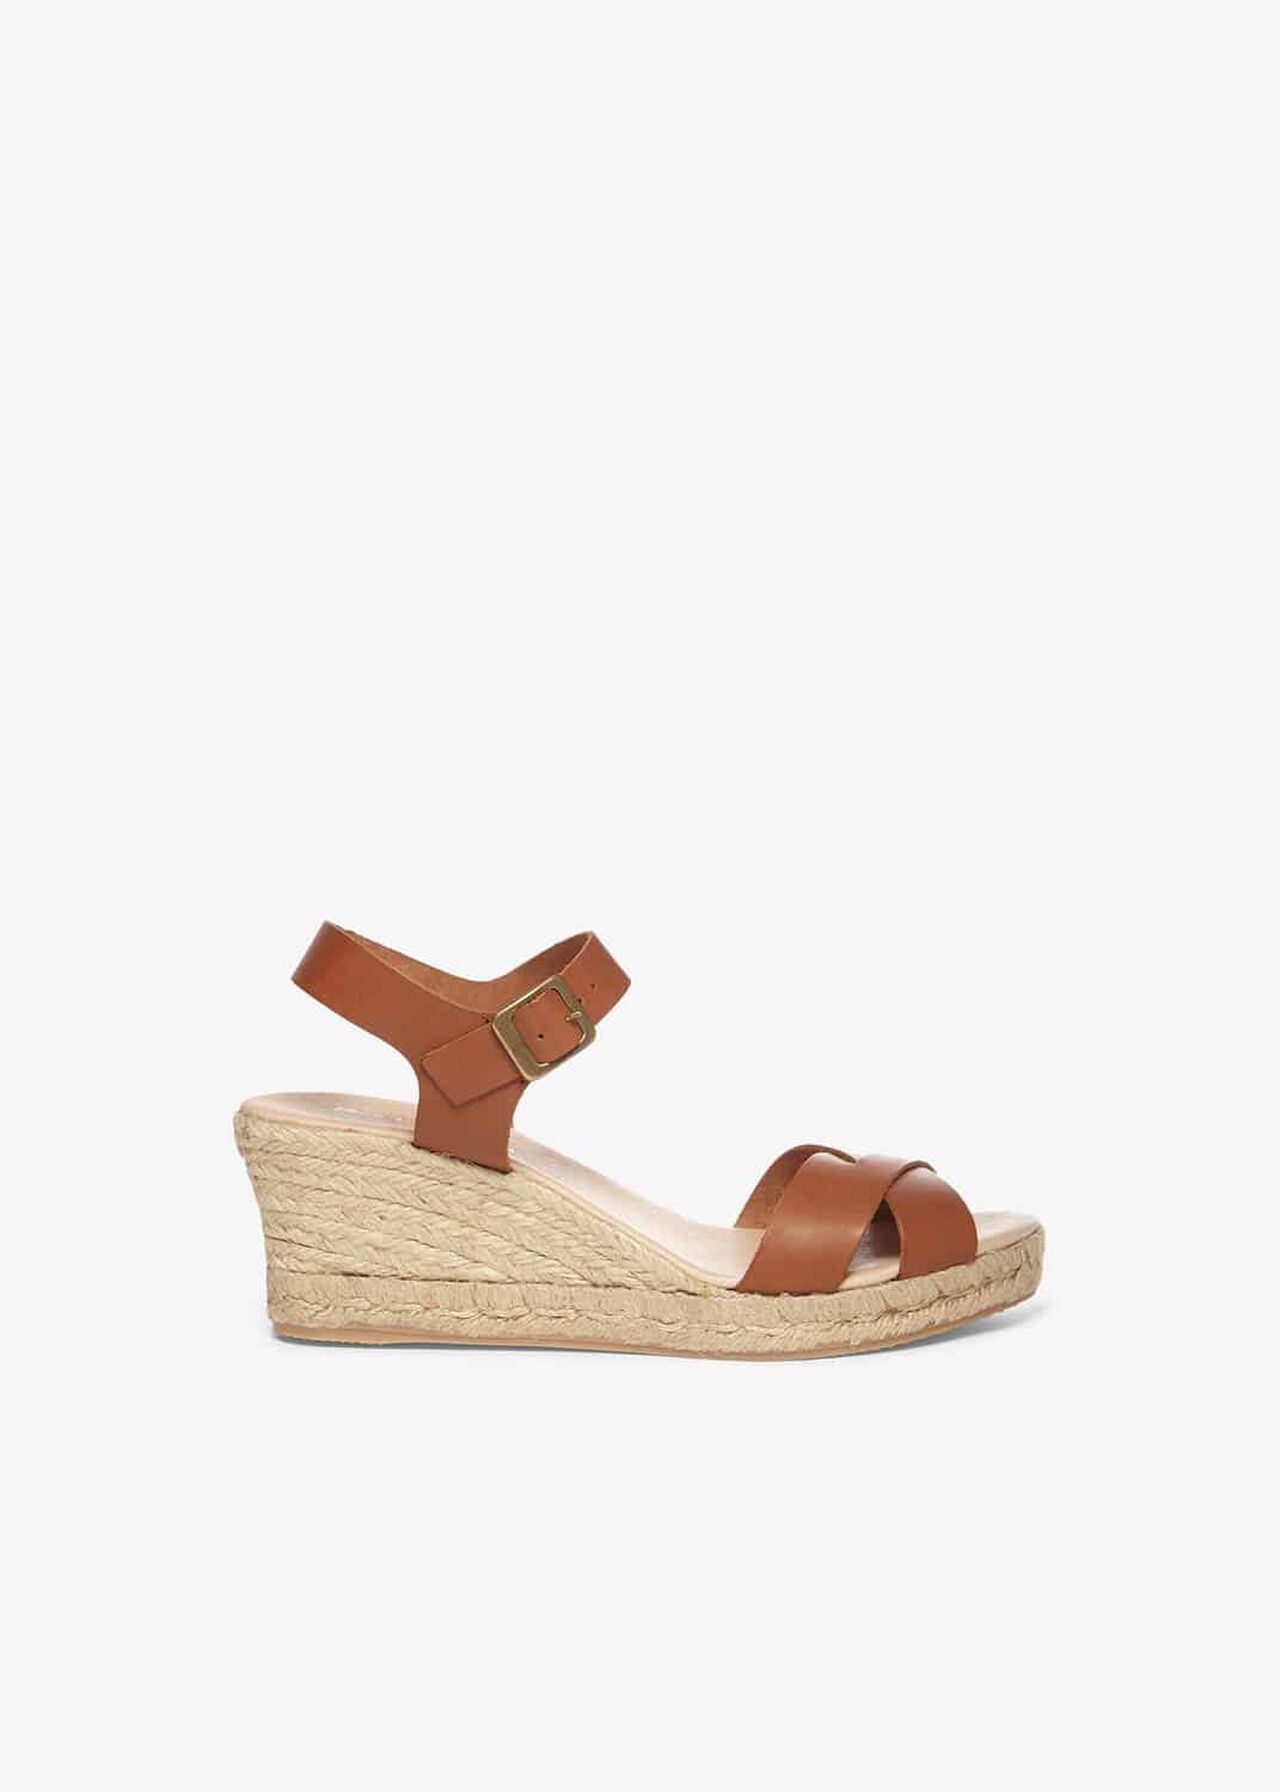 Julienne Leather Espadrille Wedge Shoes